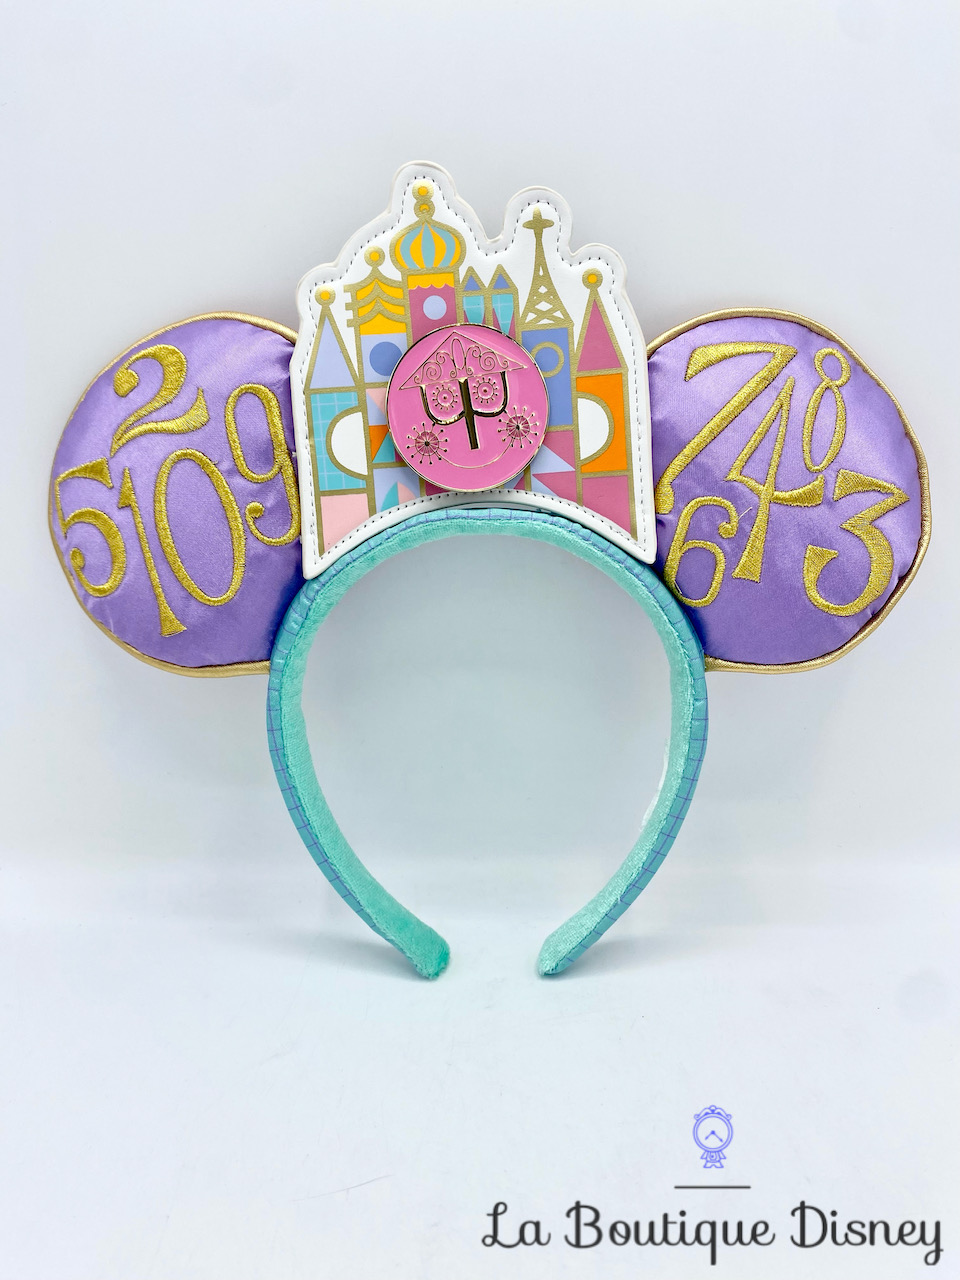 oreilles-ears-mickey-mouse-its-a-small-world-the-main-attraction-disney-store-édition-limitée-serre-tete-1